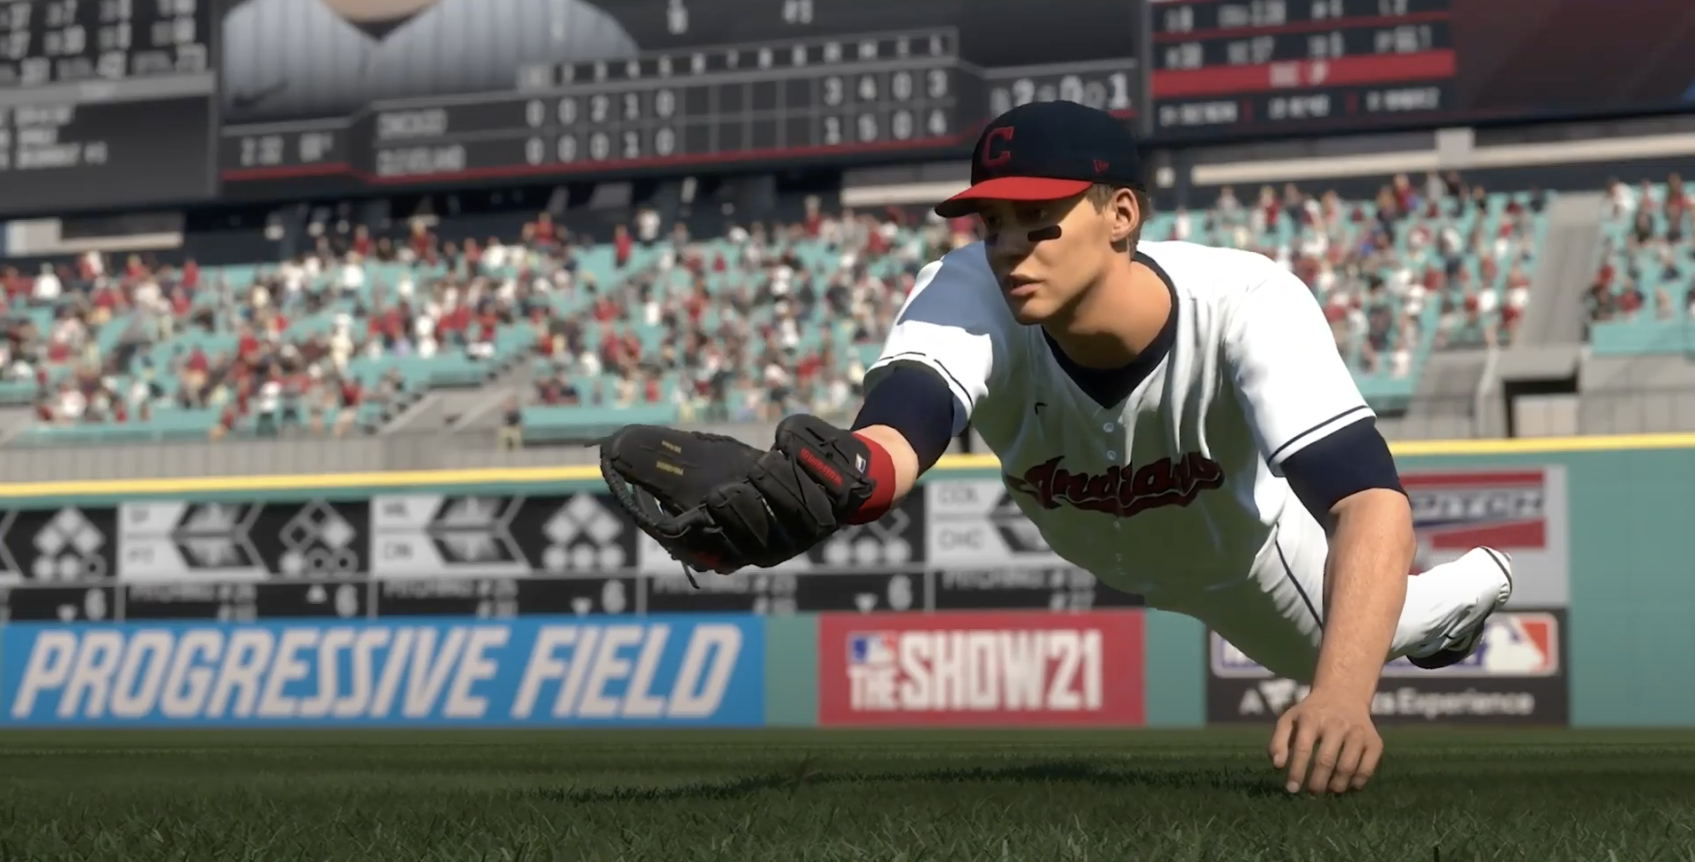 MLB The Show 21 Overhaul Focuses on Removing Annoyances